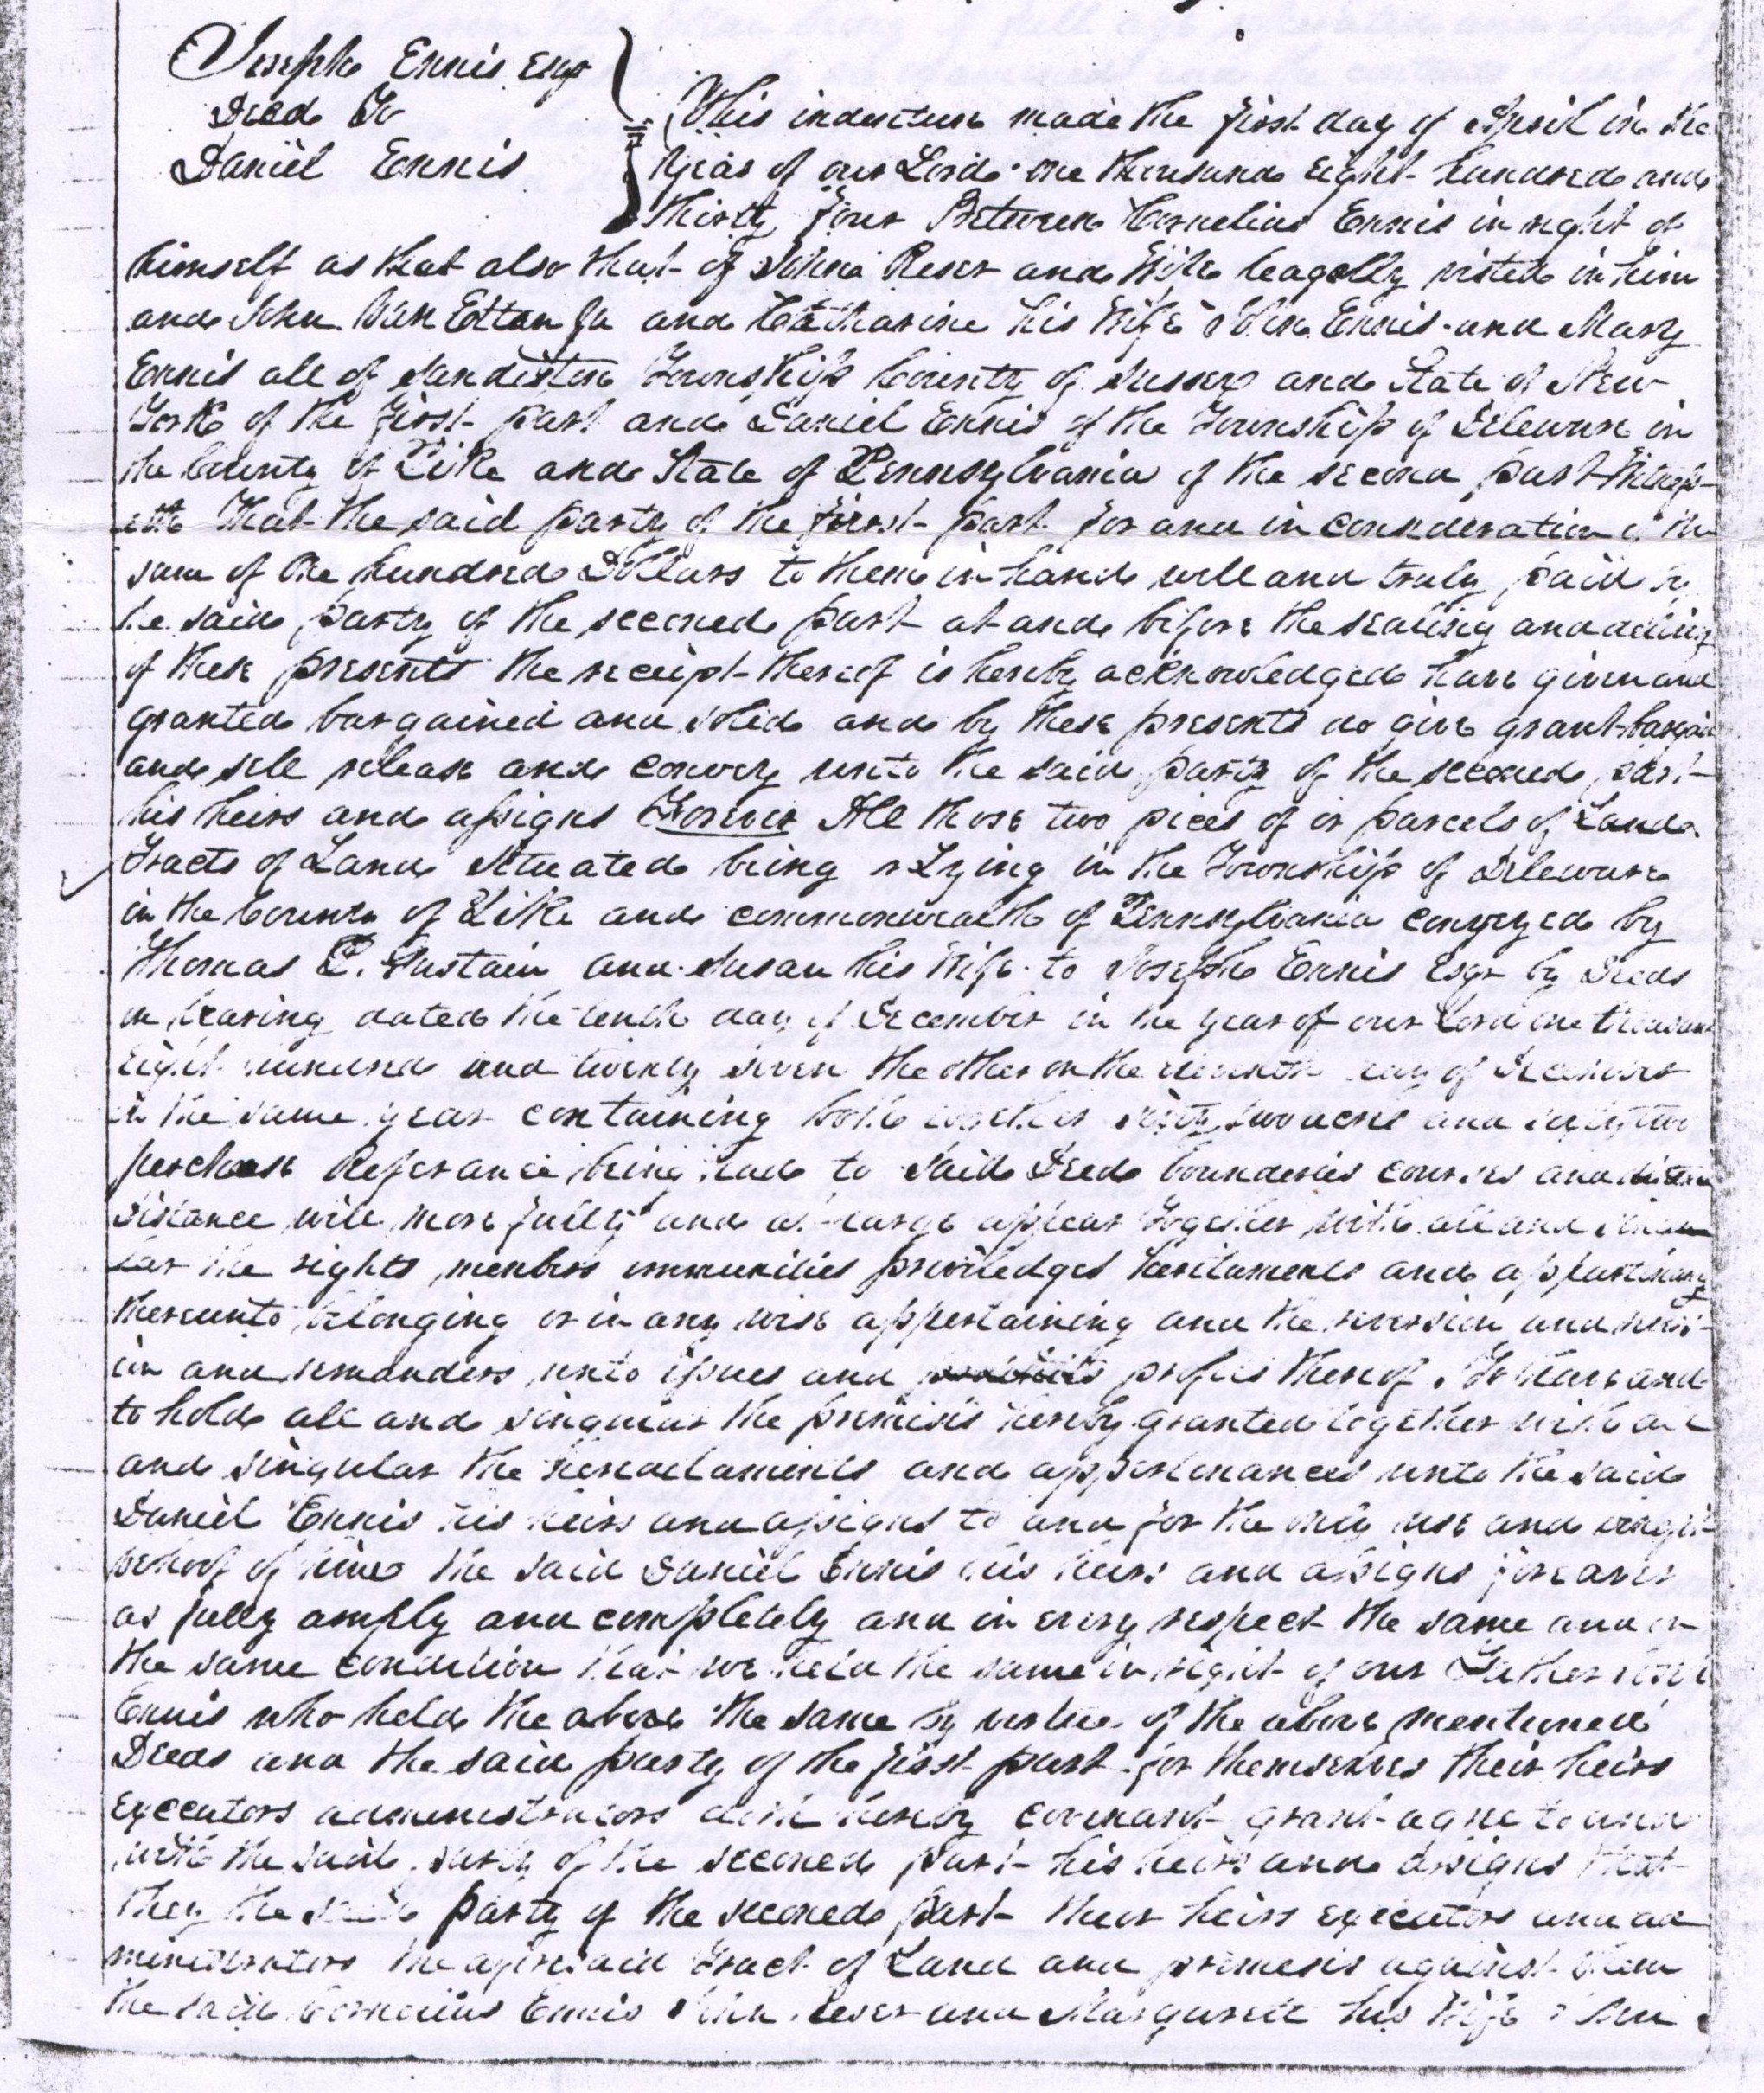 Deed related to the estate of Joseph Ennest, page 1